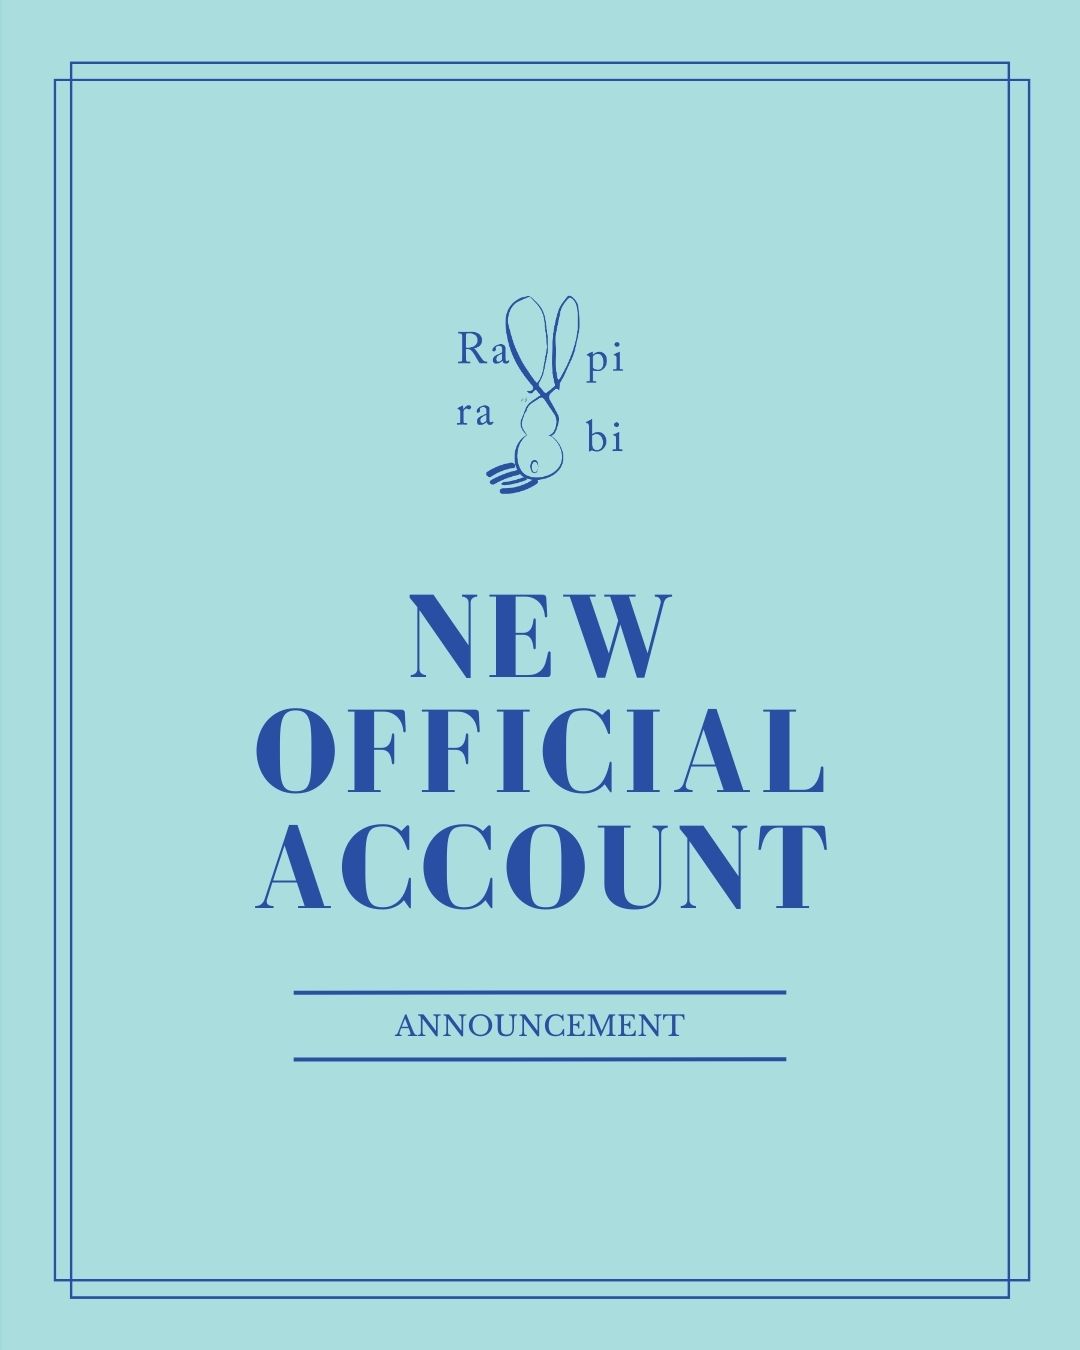 (TH) ❌Announcement : New official account ❌📢 By Rapi-rabi